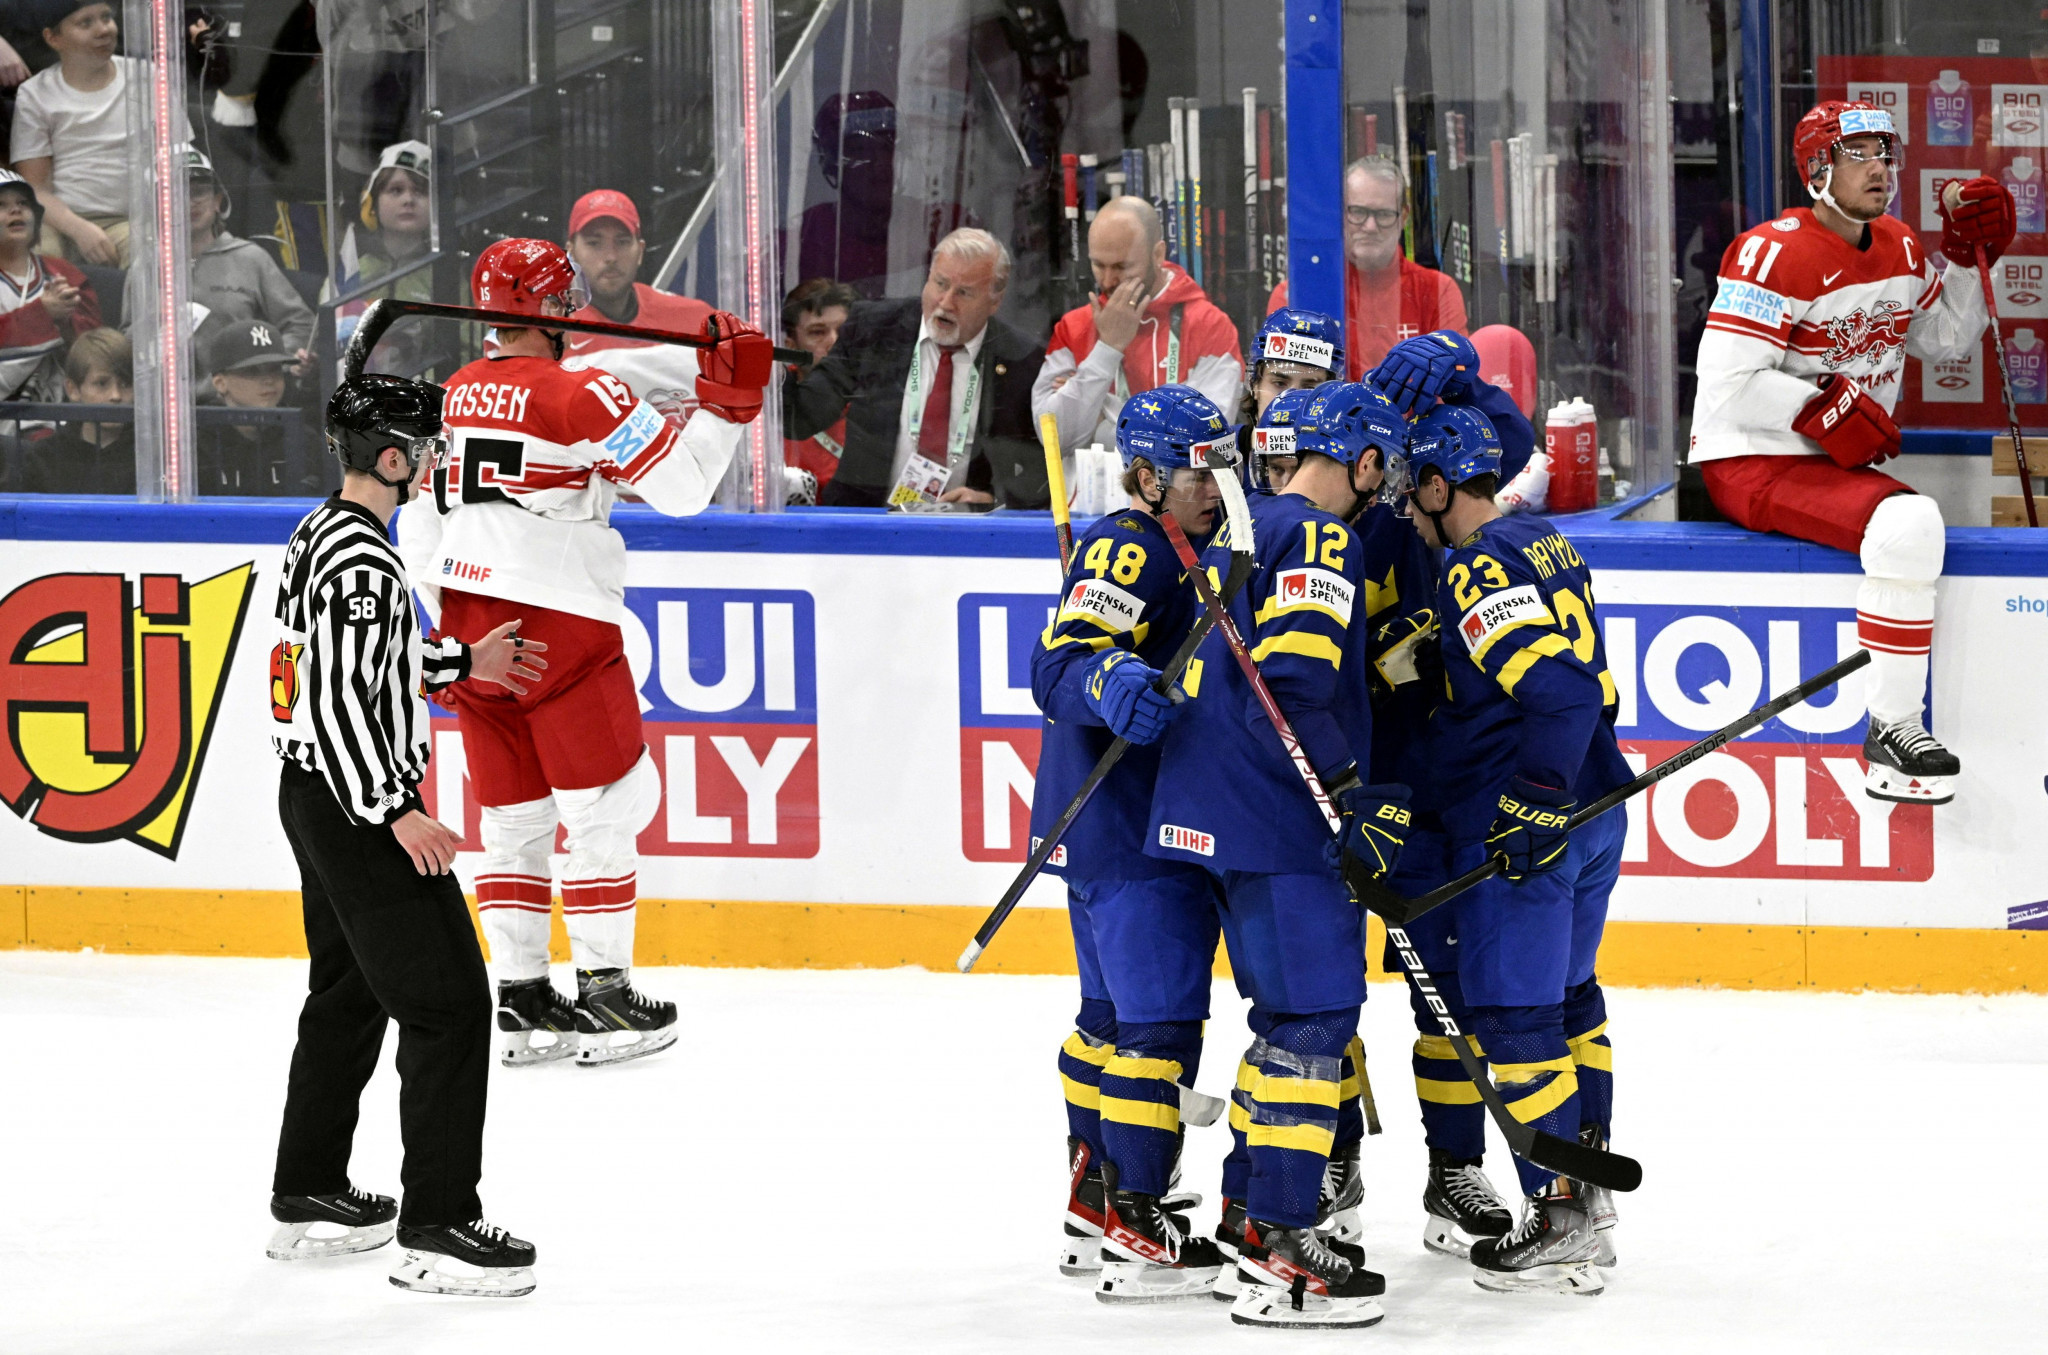 Sweden defeated Denmark to set up a top of the table showdown with United States in Group A at the Ice Hockey World Championship ©Getty Images